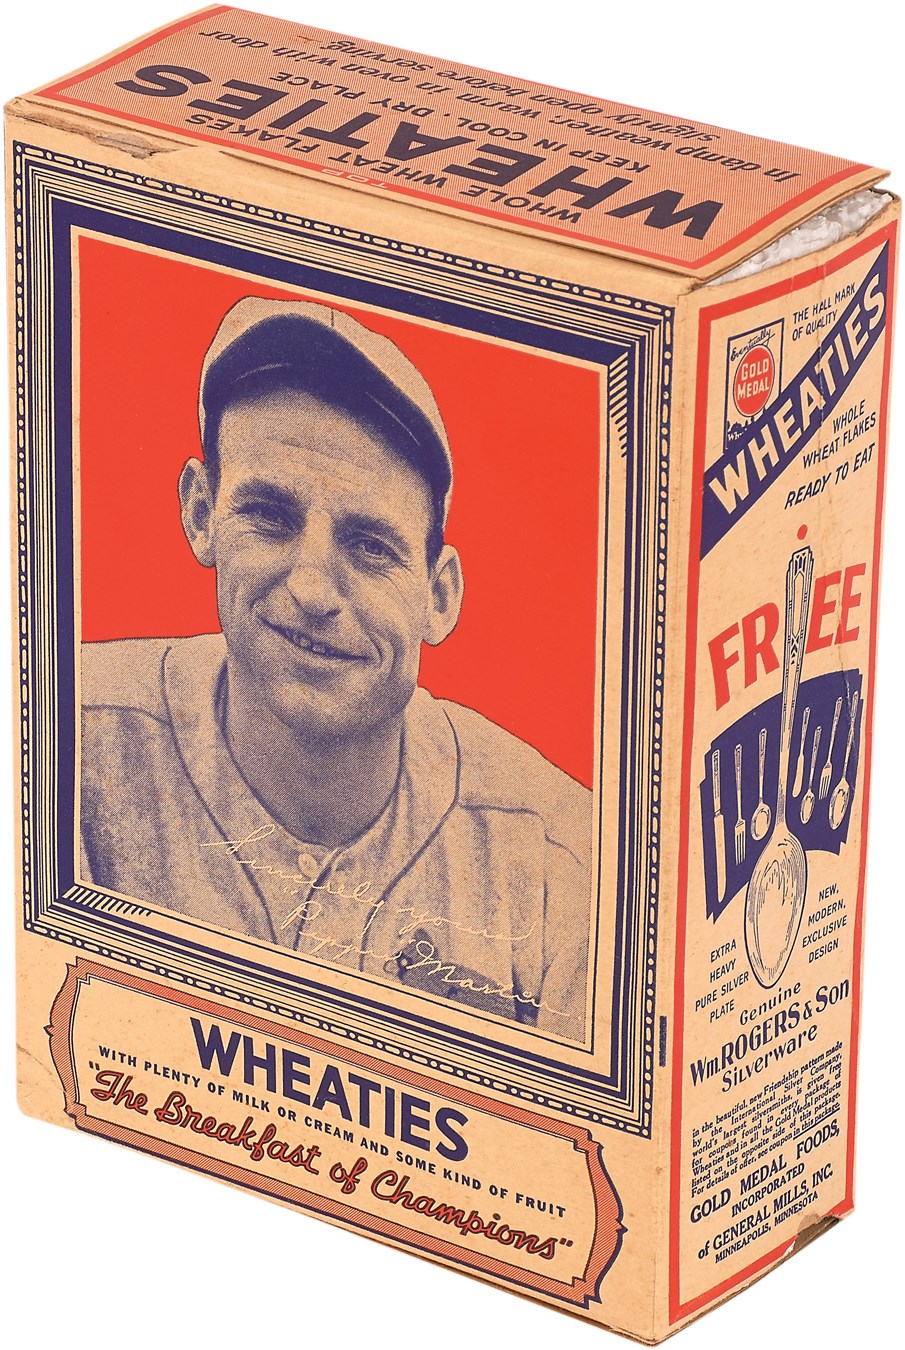 Baseball and Trading Cards - Pepper Martin 1935 Wheaties Series-1 Complete Box - Nicest One!